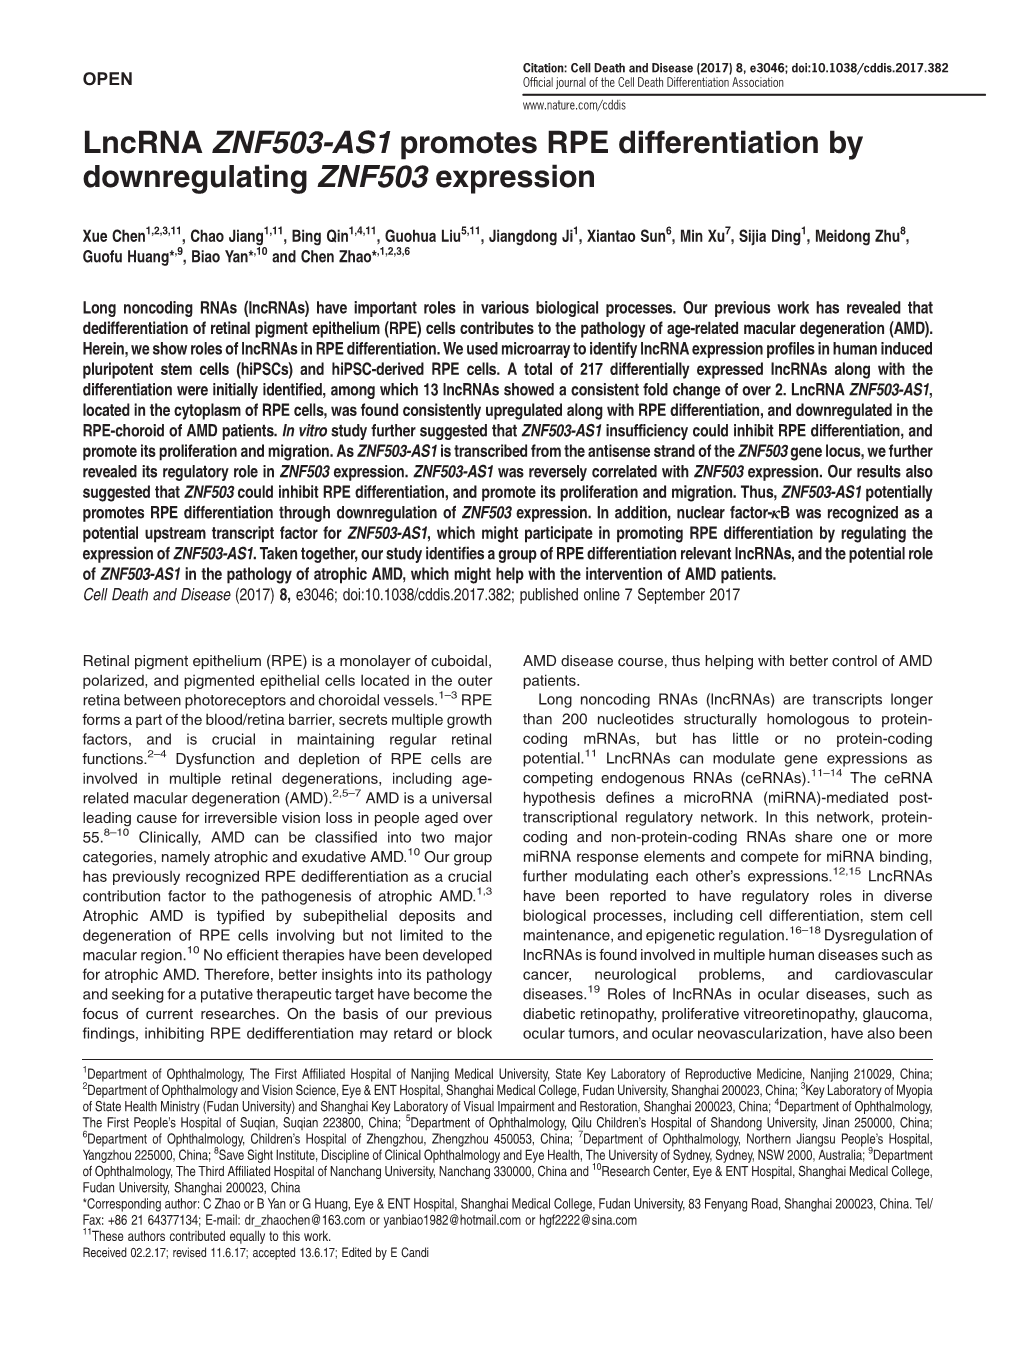 Lncrna ZNF503-AS1 Promotes RPE Differentiation by Downregulating ZNF503 Expression